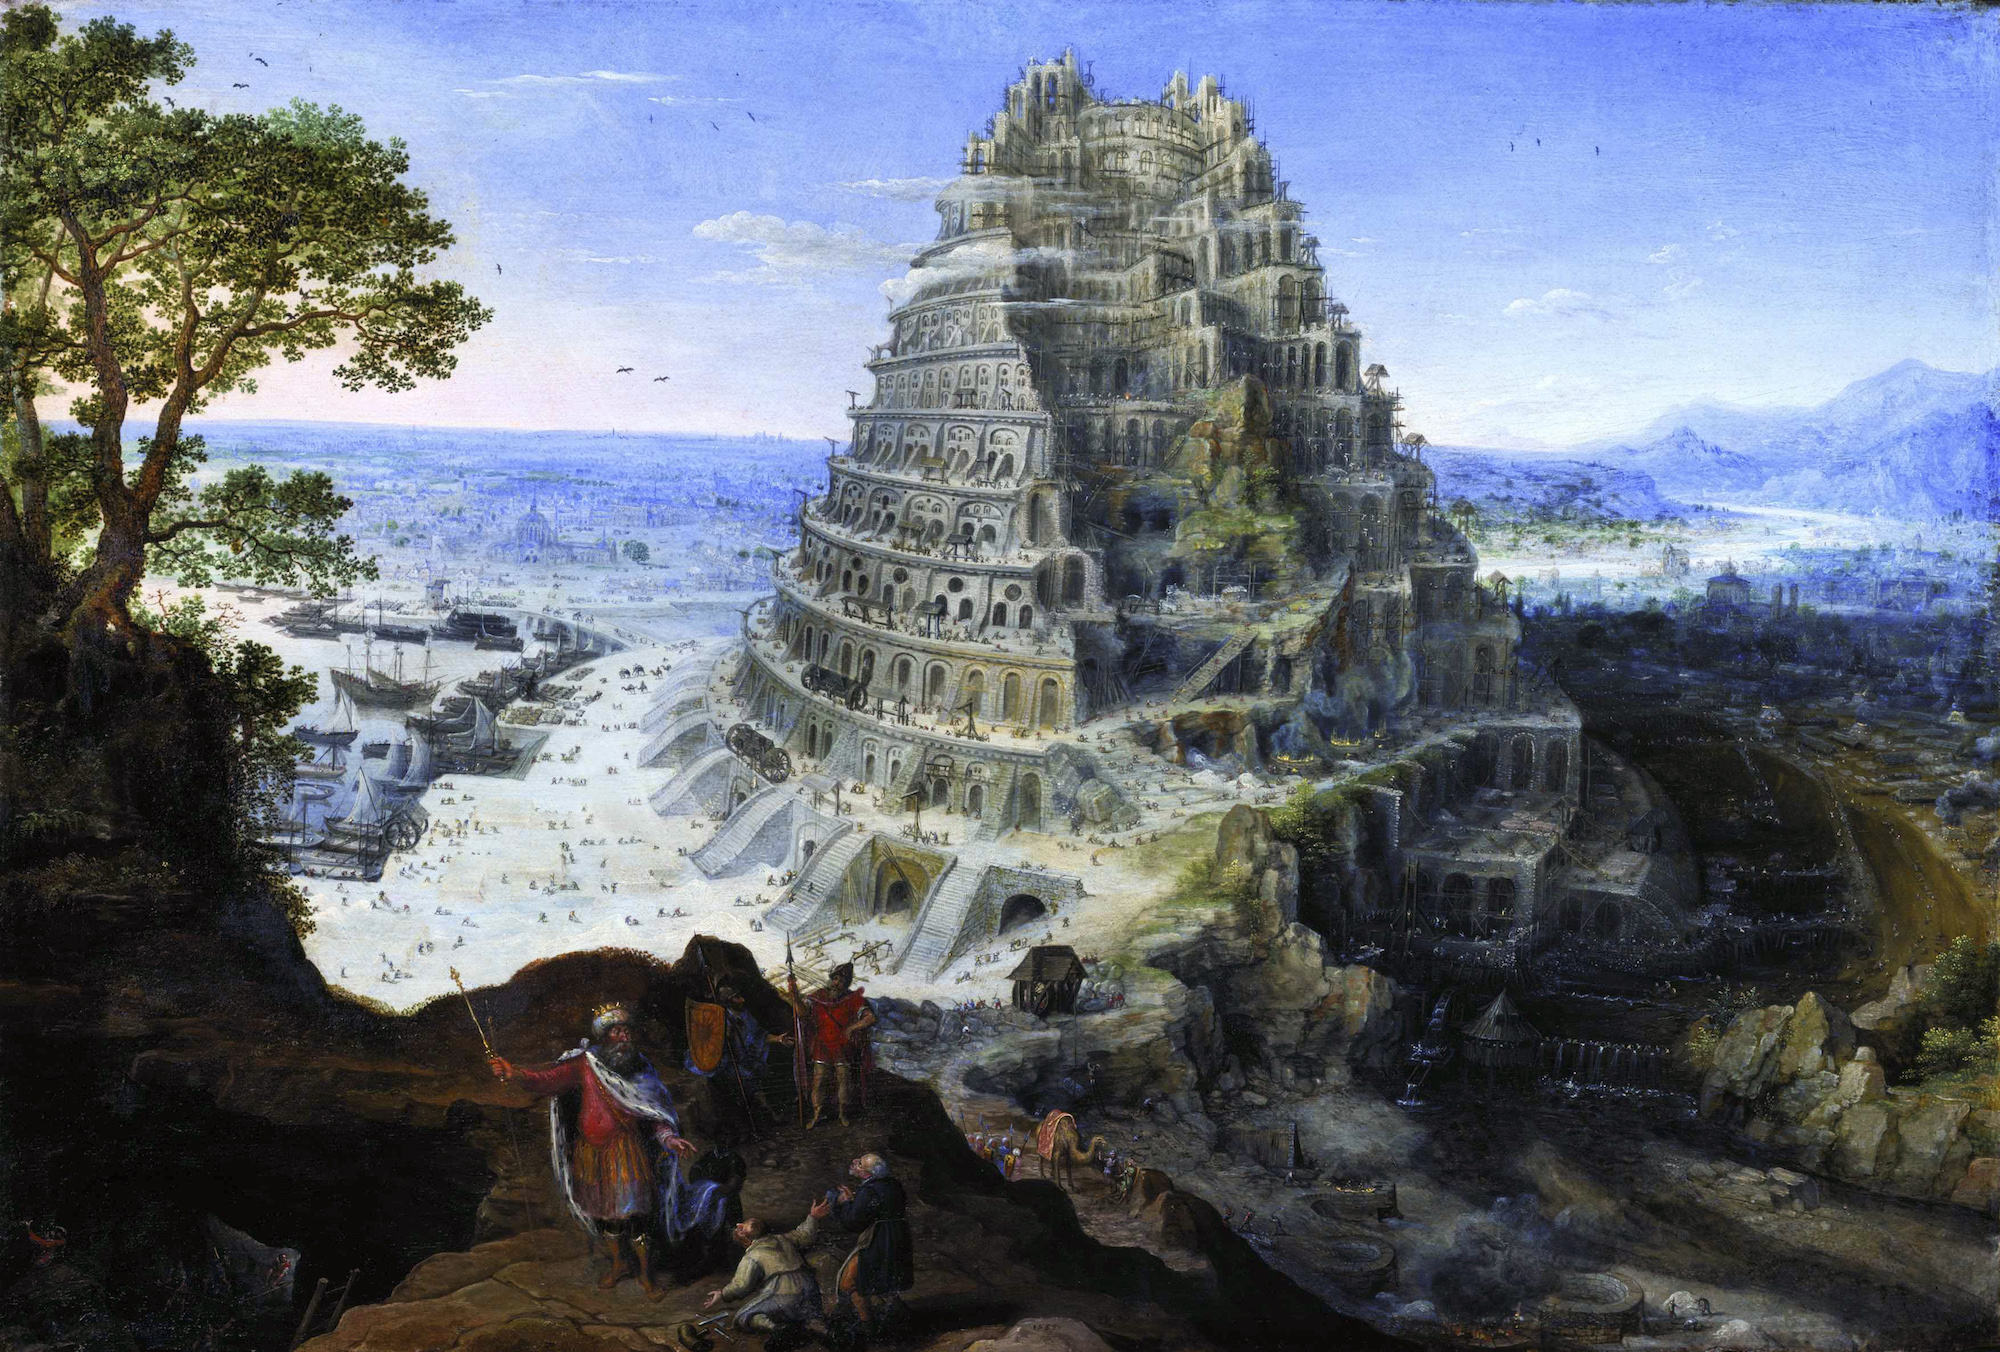 From The Tower of Babel by Lucas van Valckenborch, 1595. Wikimedia.
